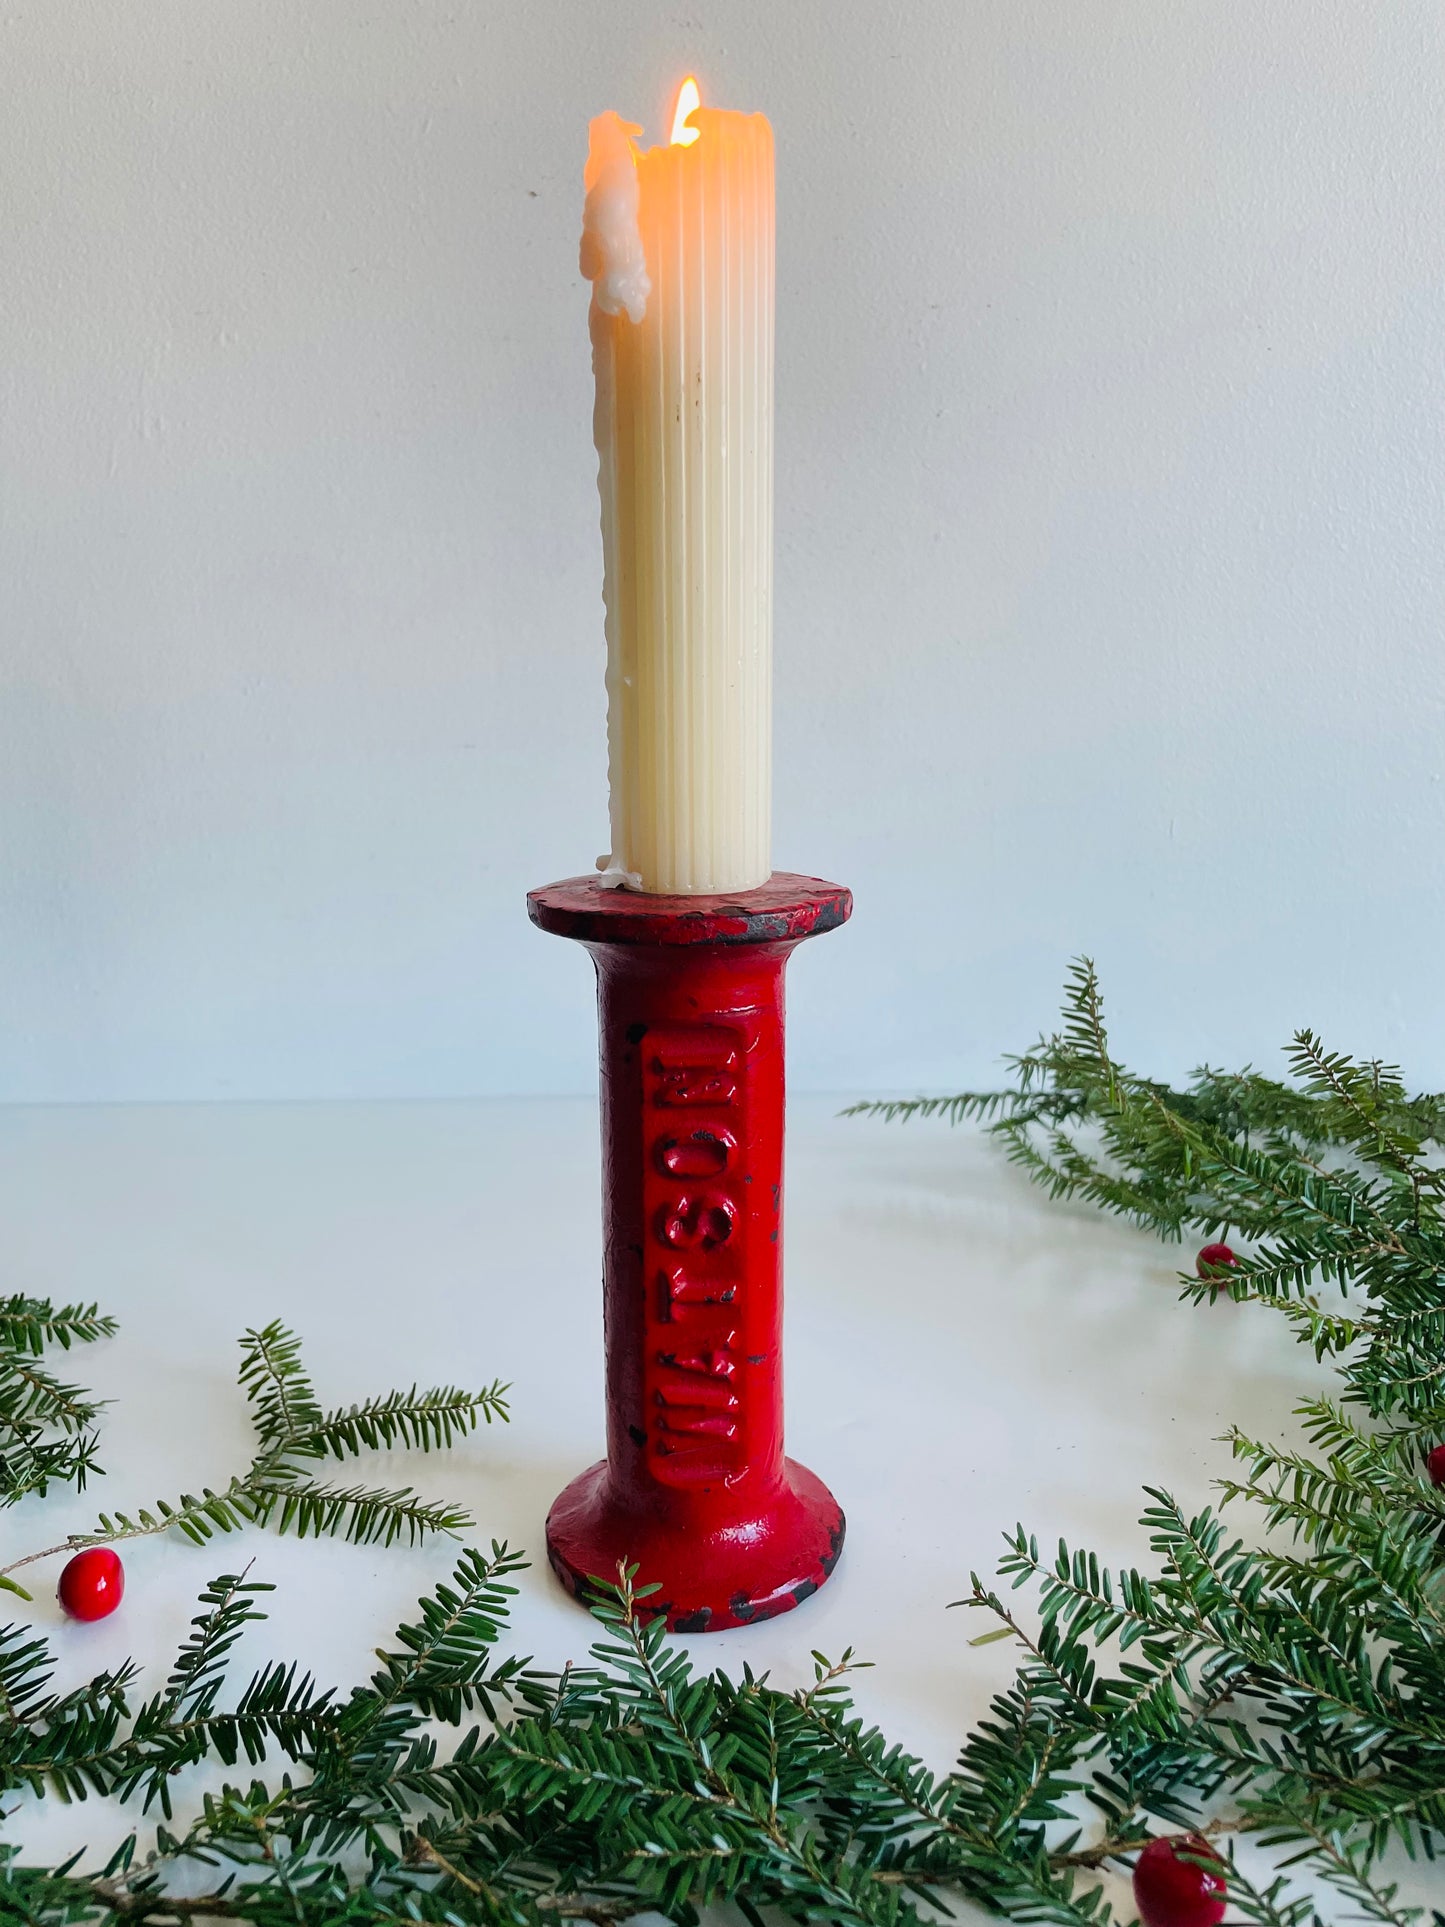 Solid & Heavy Red Whipper Watson Dumbbell Weight Handle - Makes a Great Candle Holder!